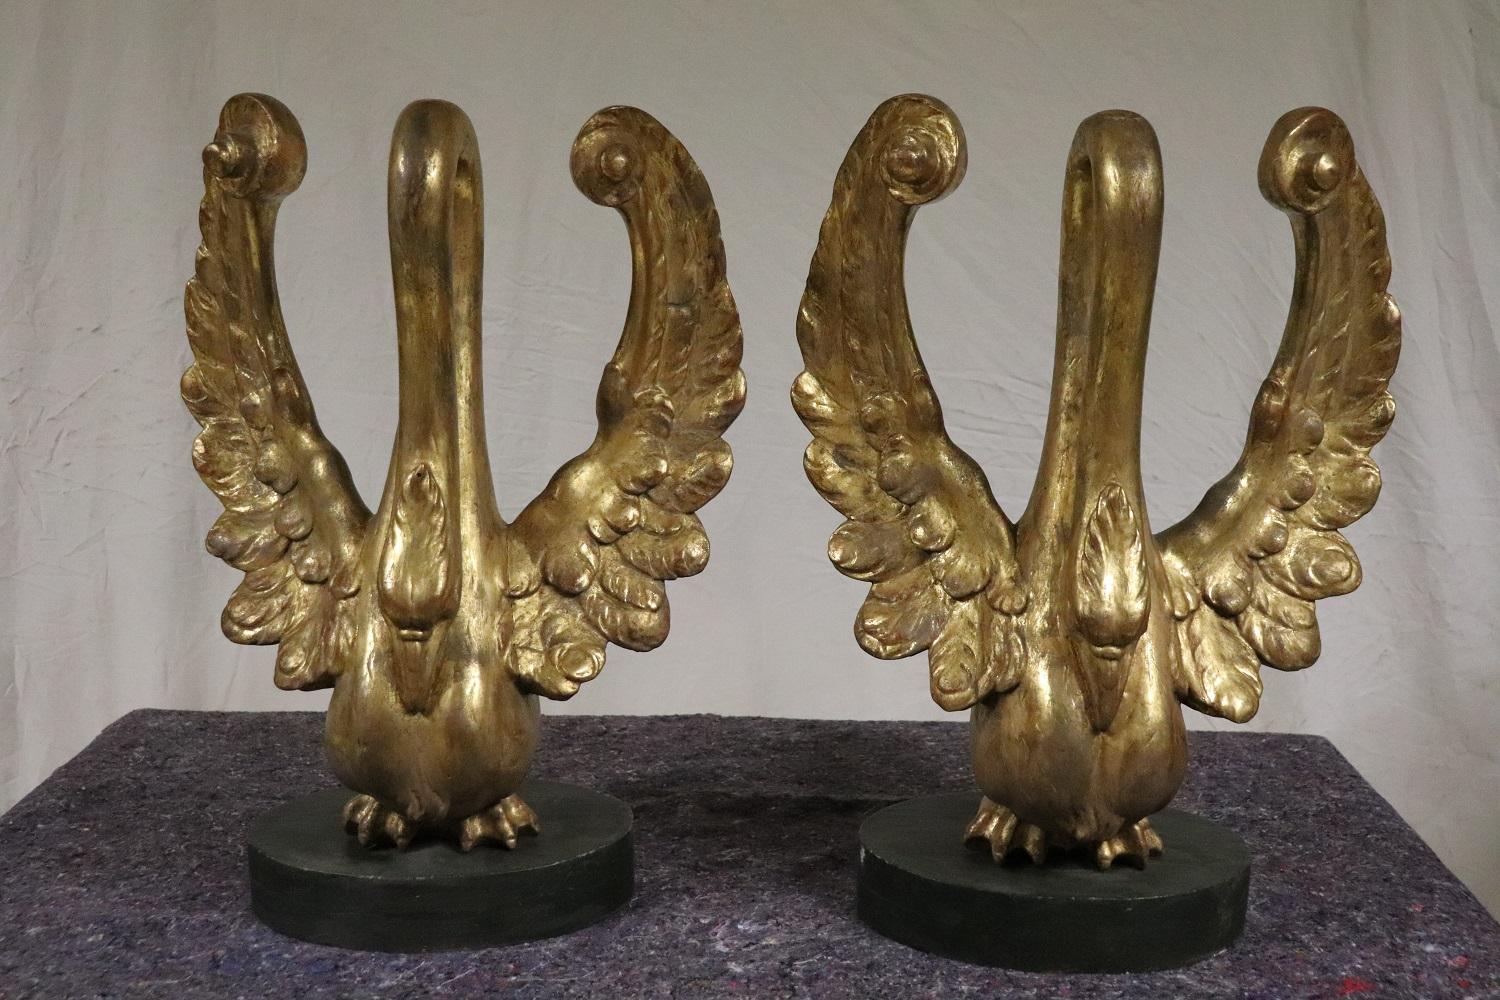 Rare antique pair of swan sculpture. If you love this animal you will need to add these two sculptures to your collection! They are fantastic large in size made of carved wood and gilded with gold leaf. The gold has acquired a beautiful old